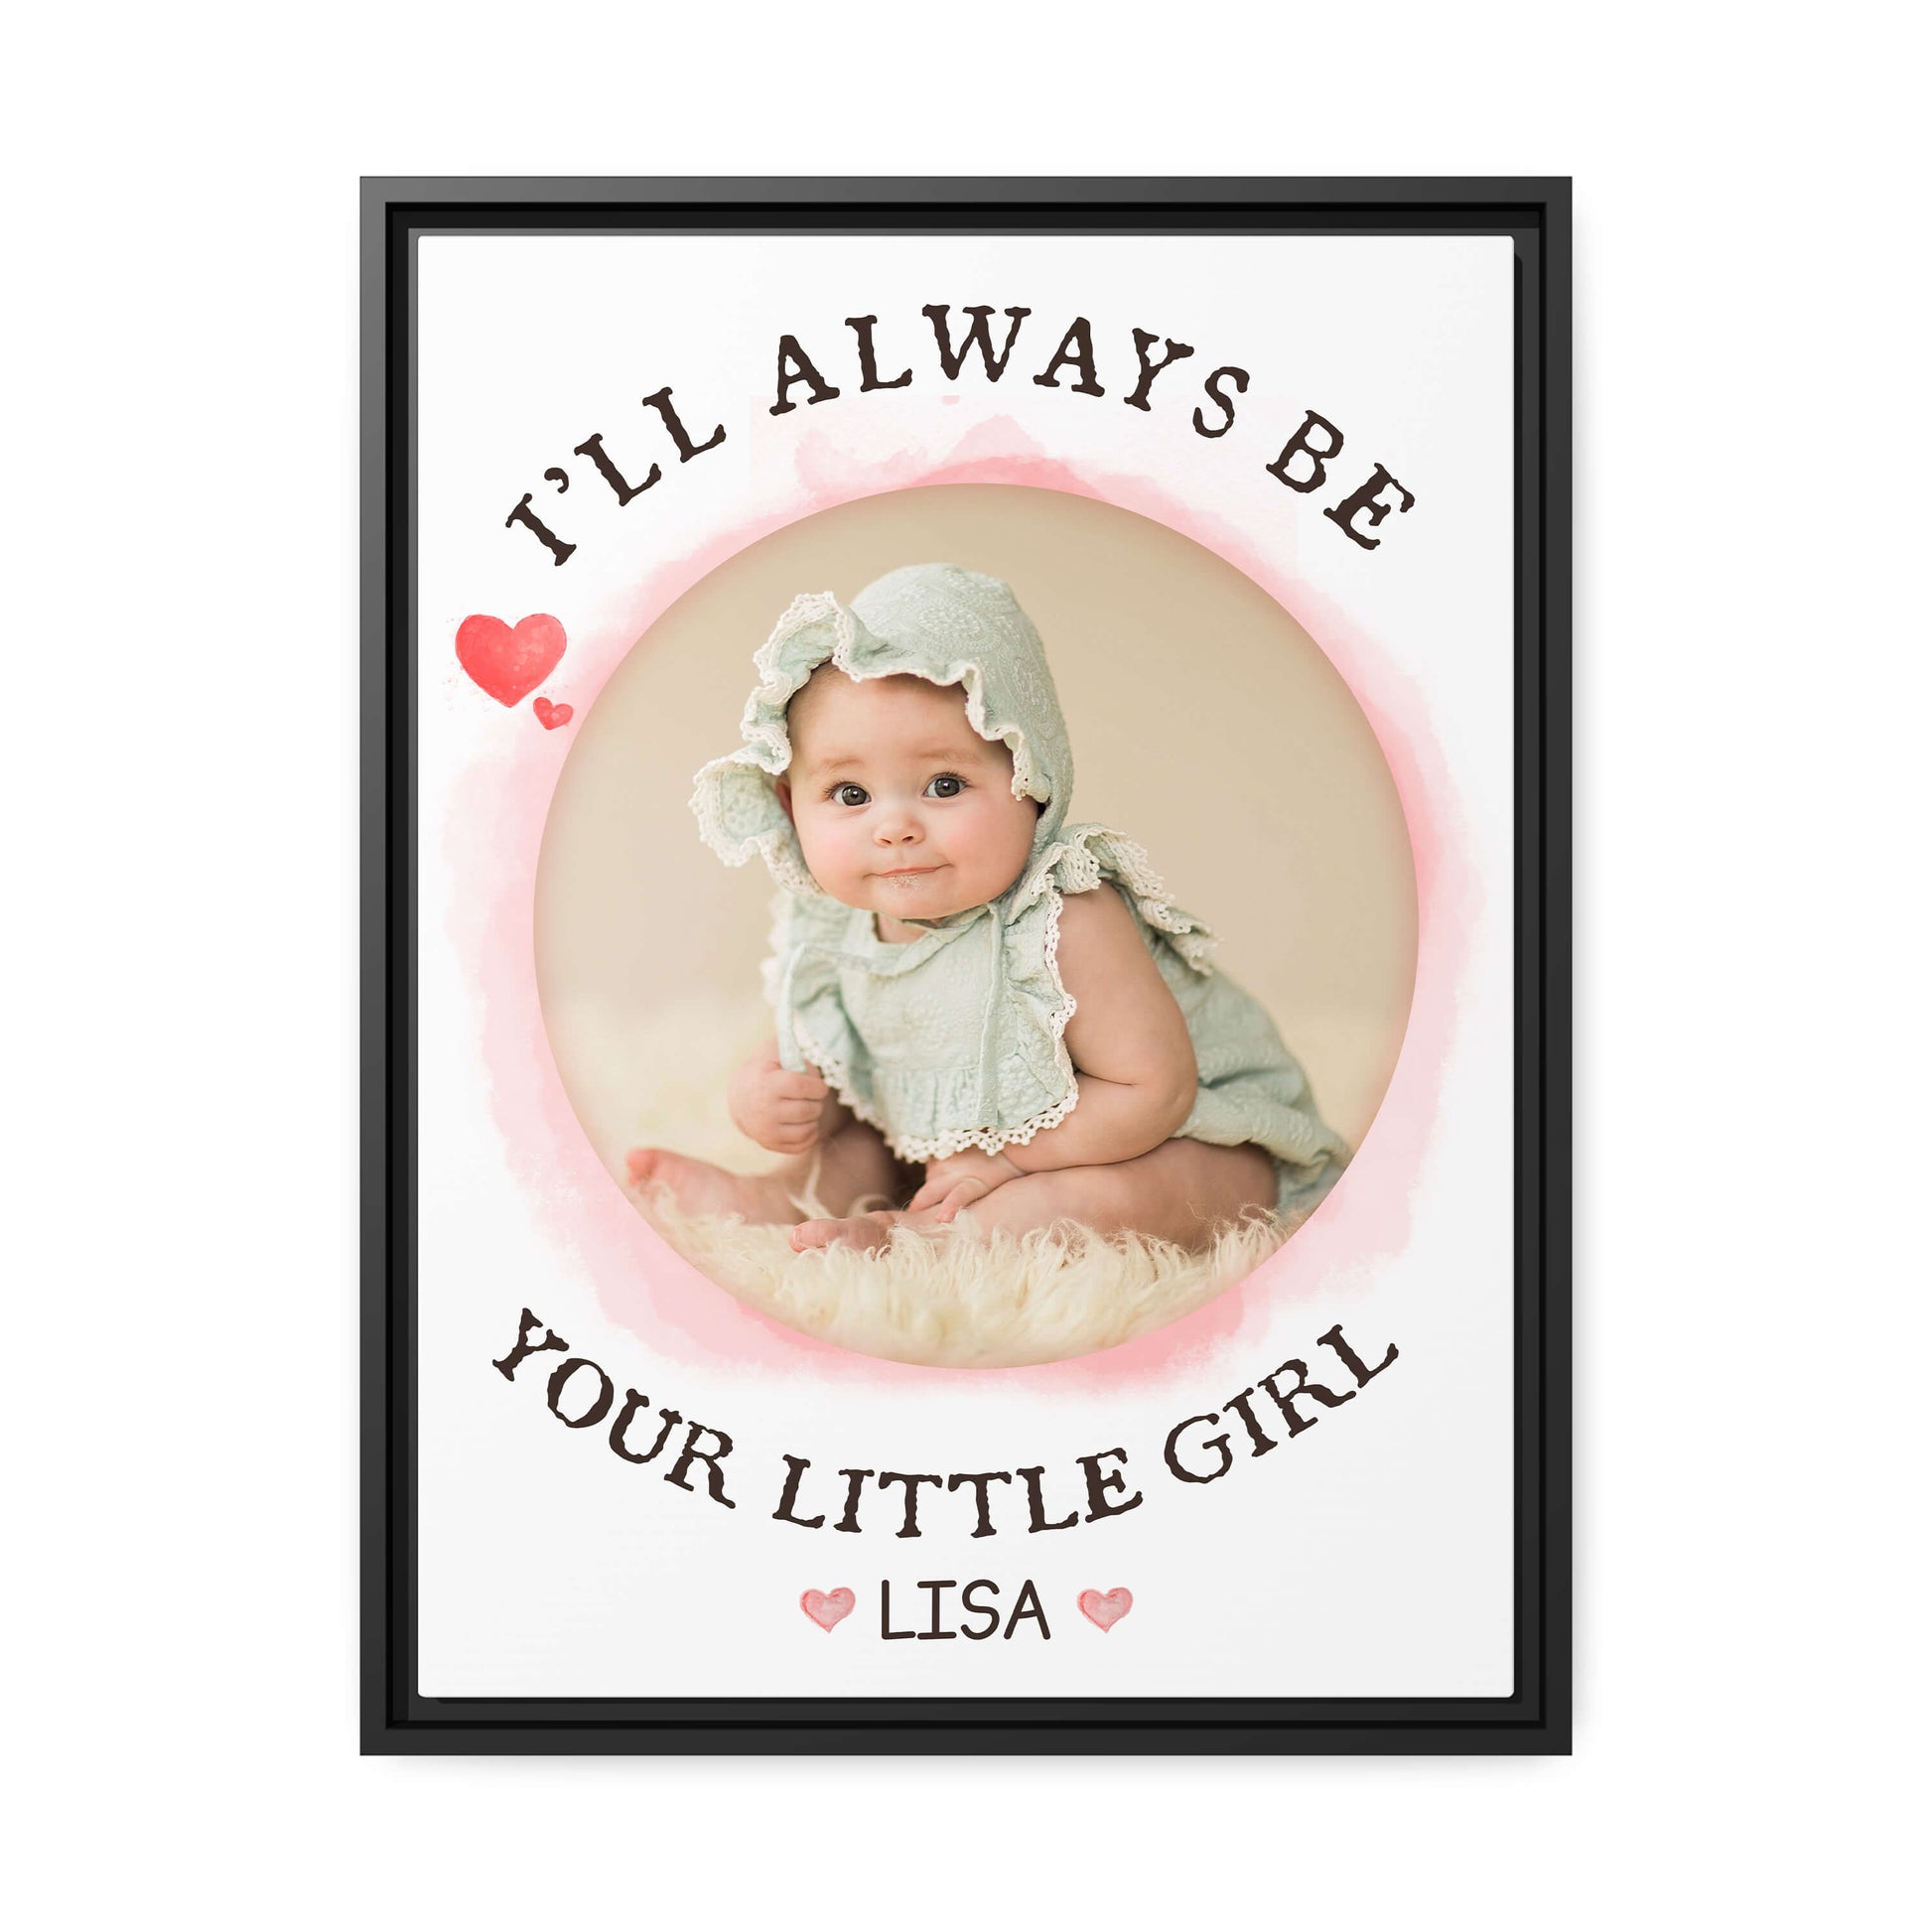 Personalized Mother's day gift for mom from daughter - Mom's little girl - custom Photo Canvas print - MyMindfulGifts